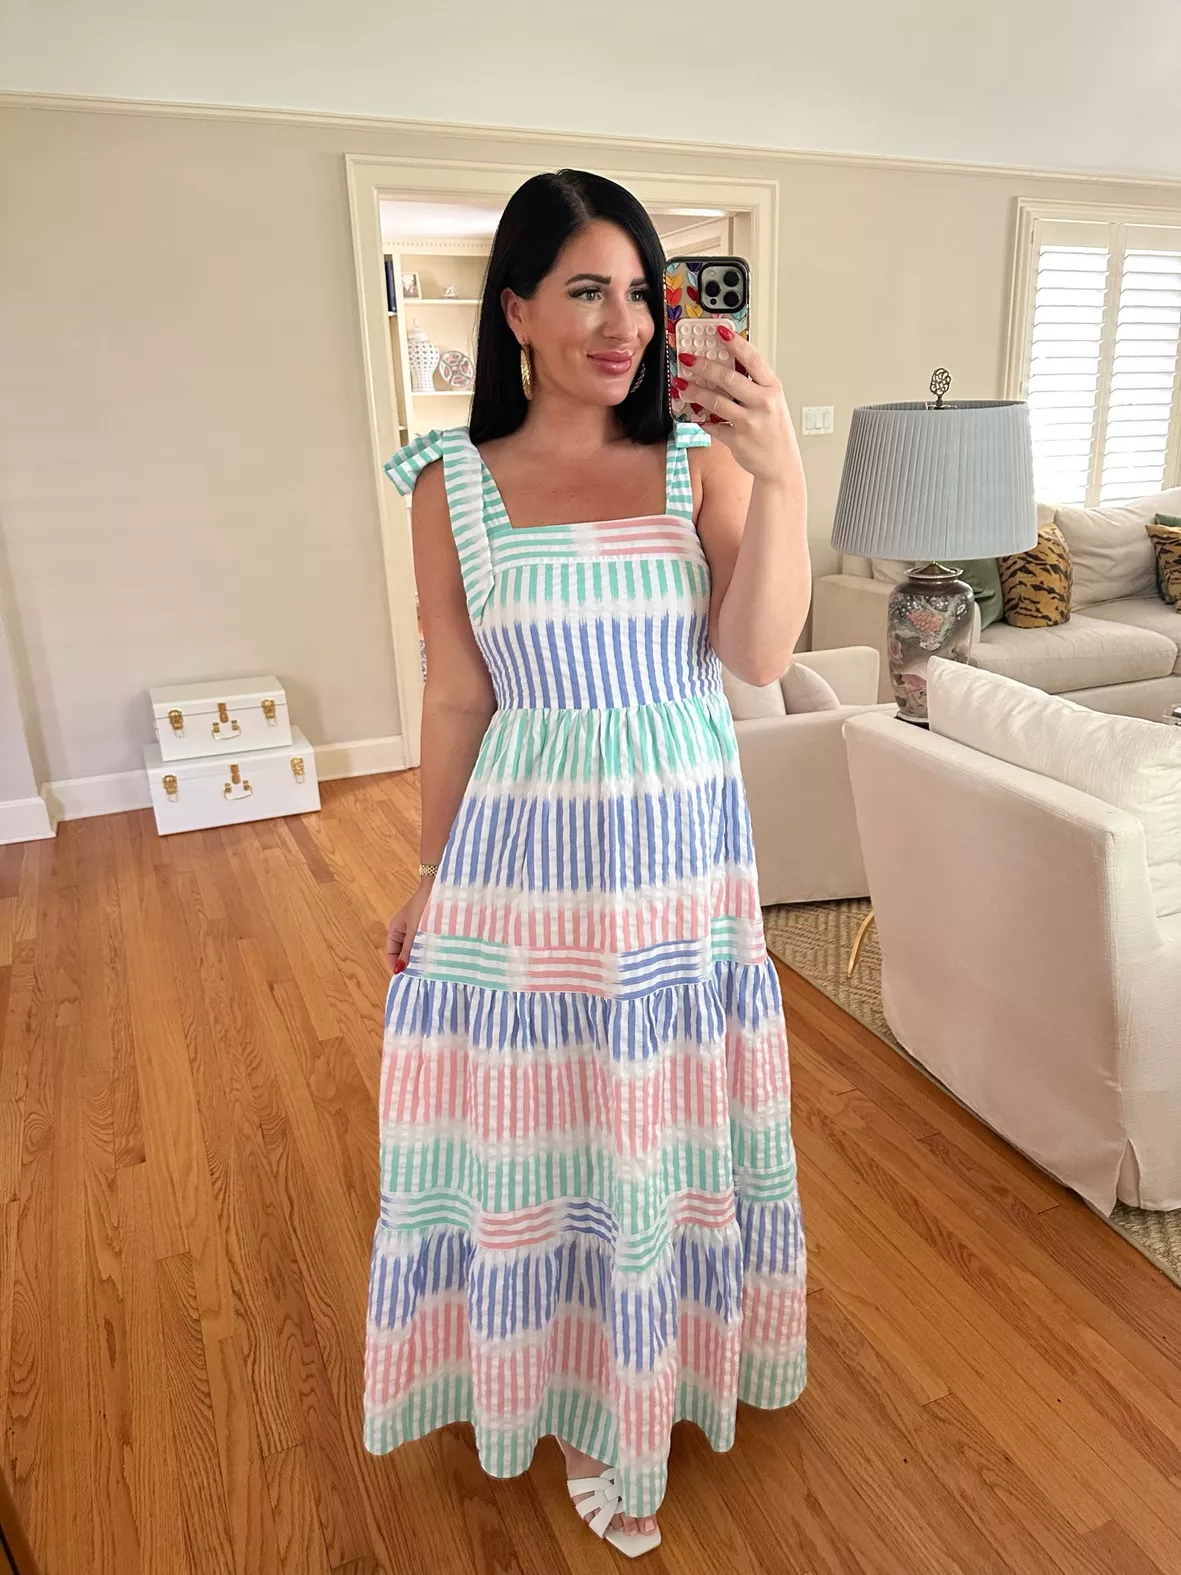 Pin on Dresses/ outfits/ kids room!